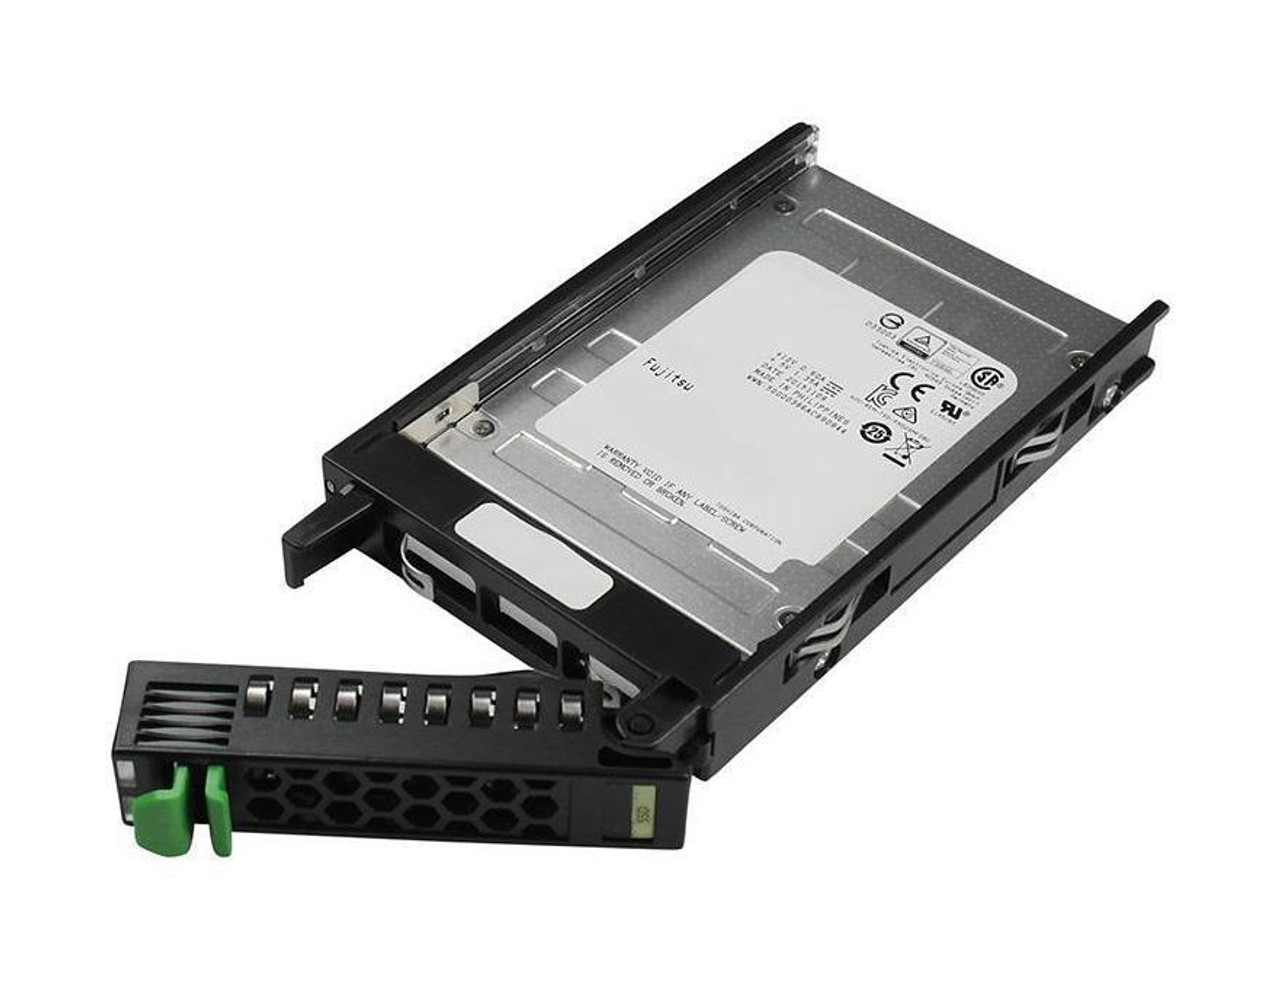 S26361-F5732-L480 Fujitsu Enterprise 480GB MLC SATA 6Gbps Hot Swap Mixed Use 2.5-inch Internal Solid State Drive (SSD) with 3.5-inch Tray